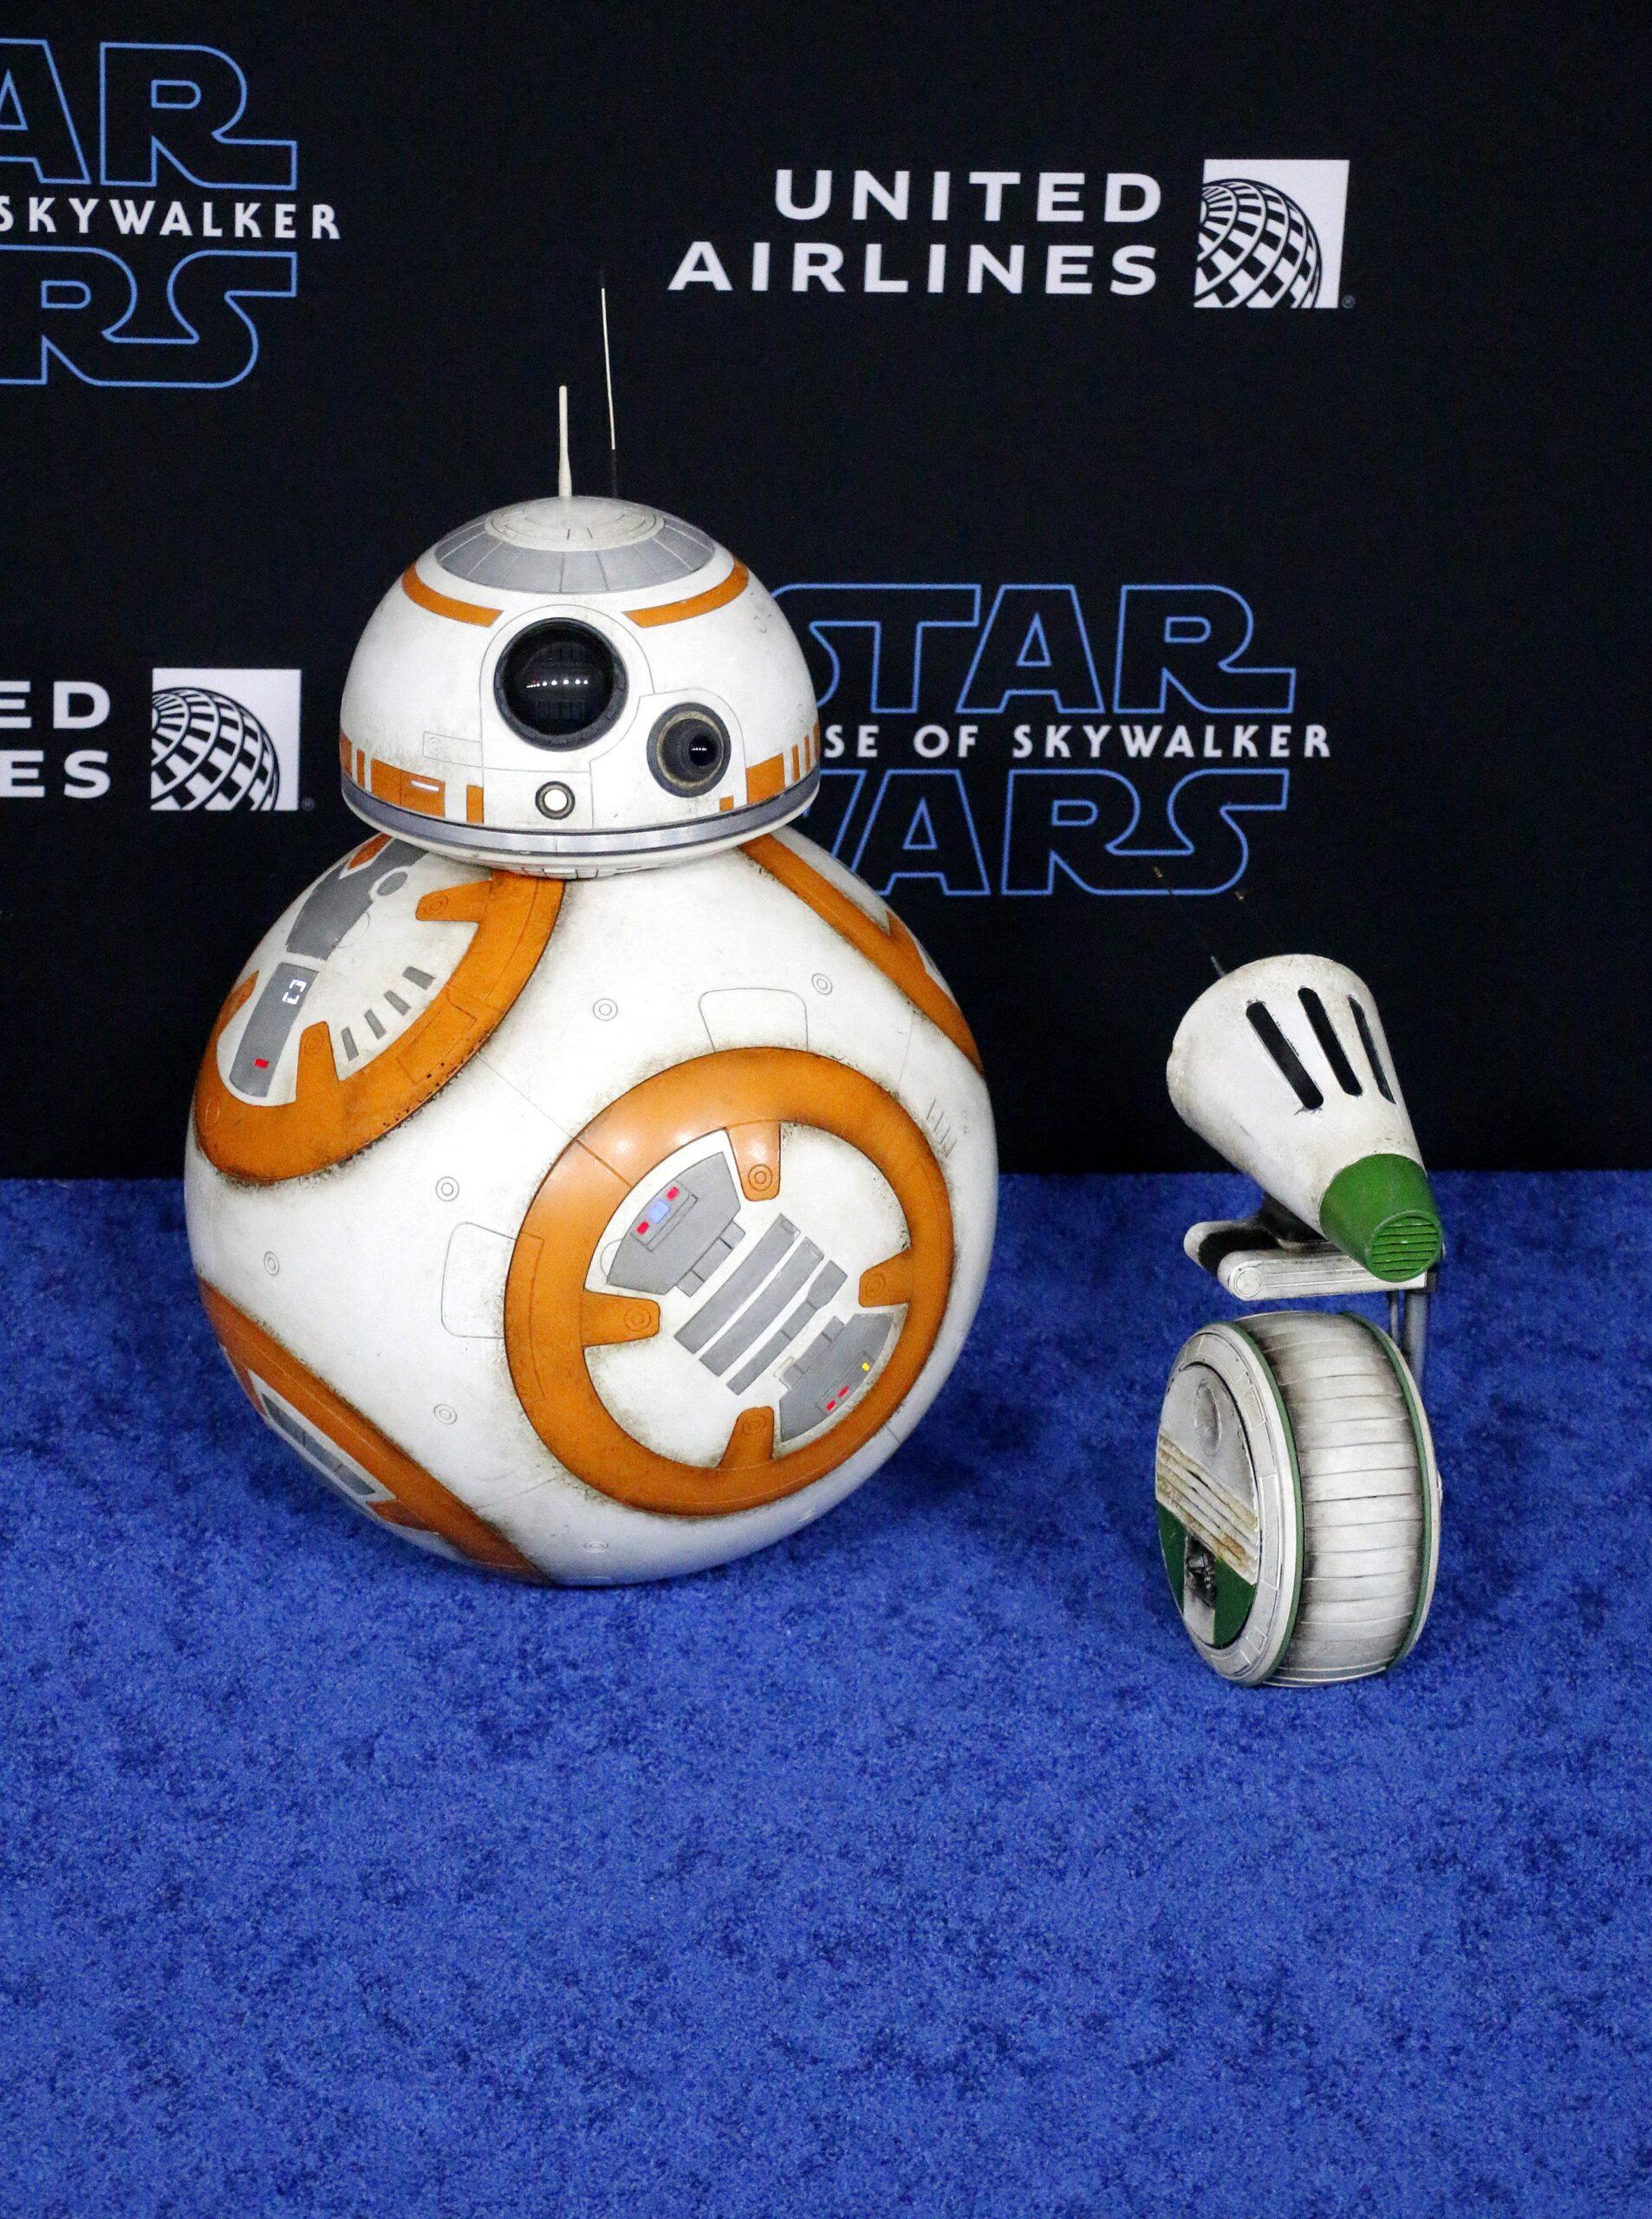 BB-8 poses alongside D-0 at 'The Rise of Skywalker' premiere